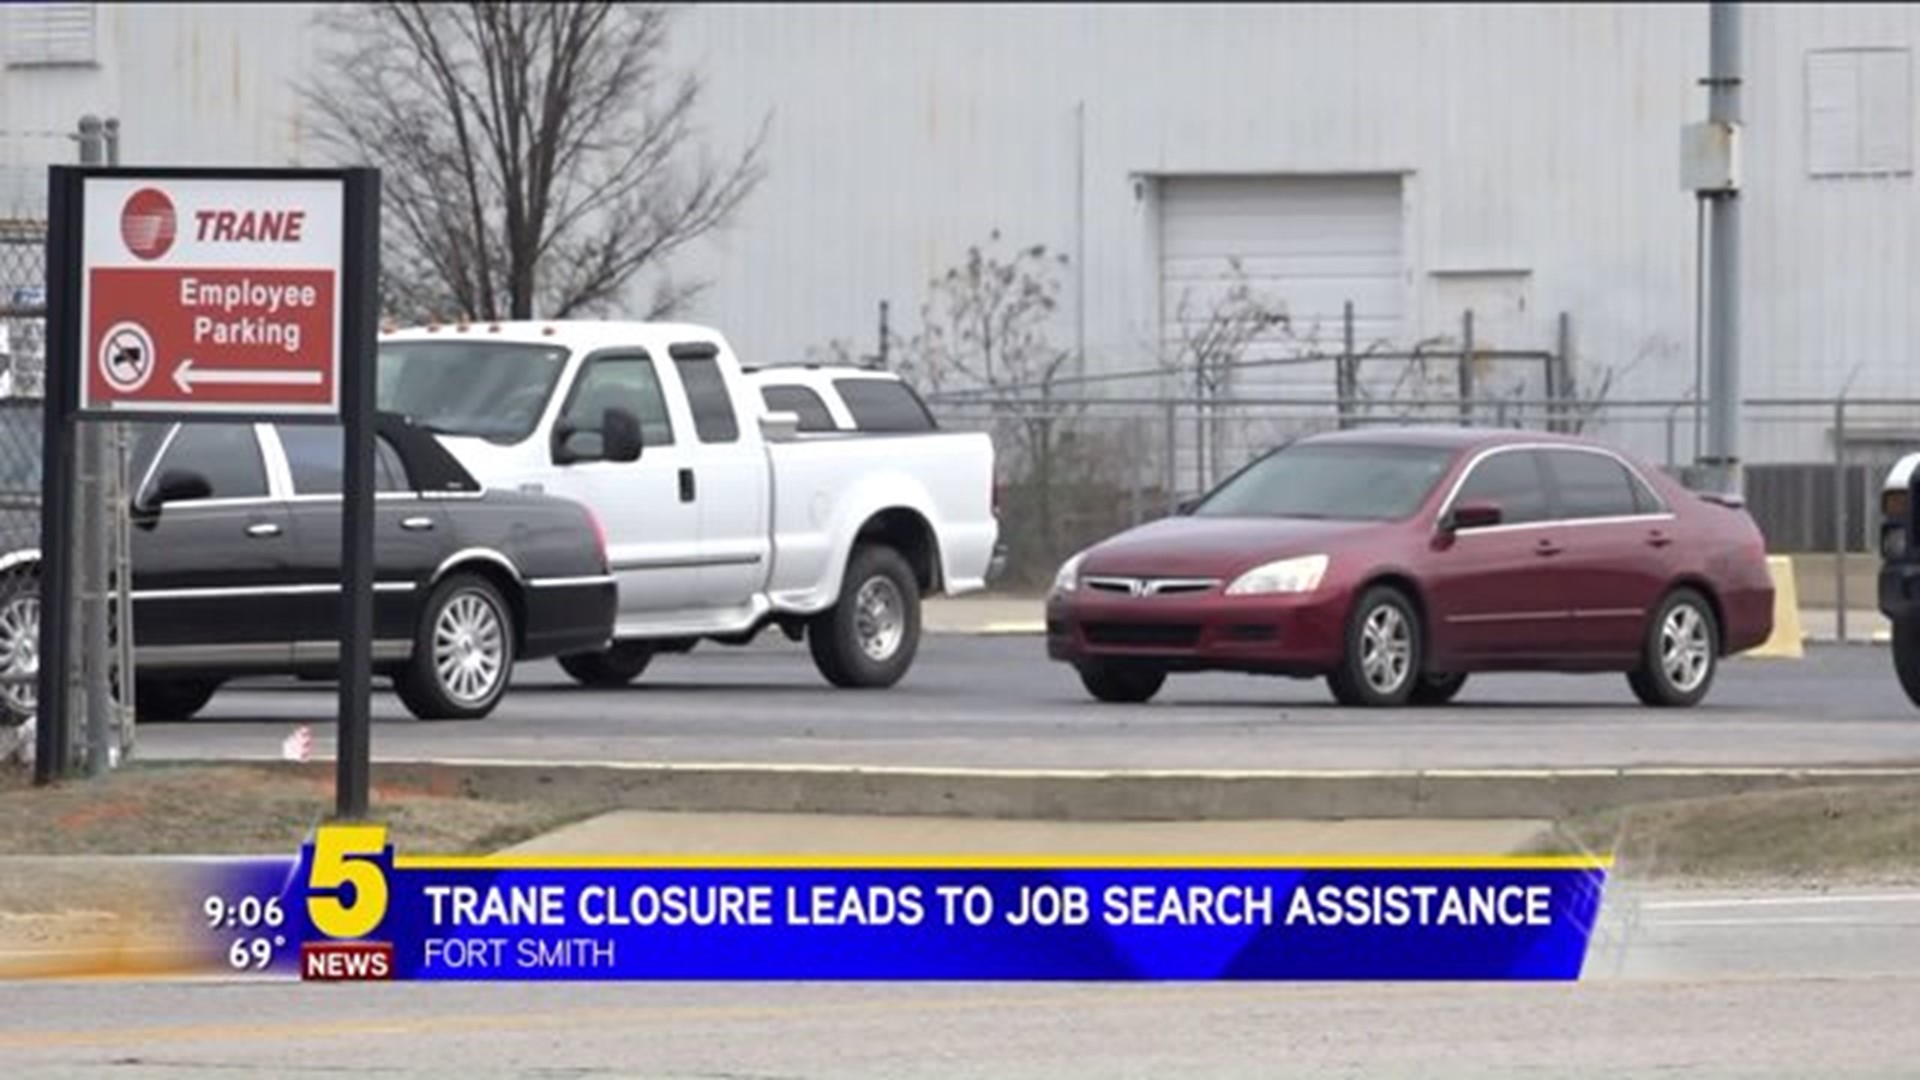 Trane Closure Leads To Job Search Assistance